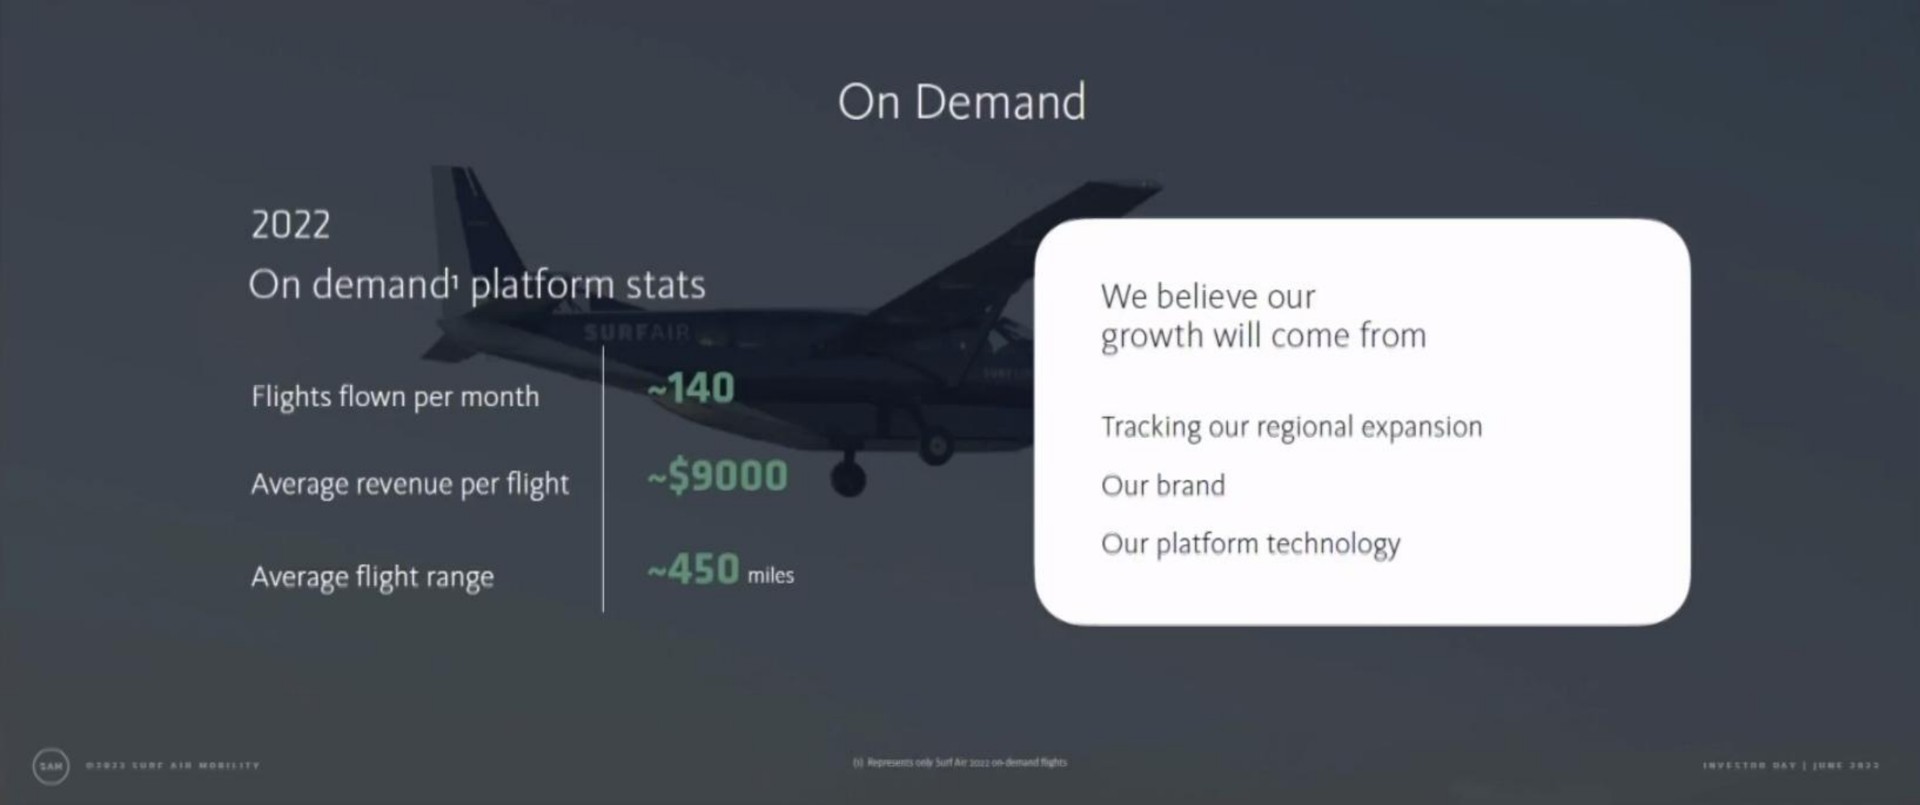 on demand on demand platform flights flown per month average revenue per flight average flight range a we believe our growth will come from tracking our regional expansion our brand our platform technology | Surf Air